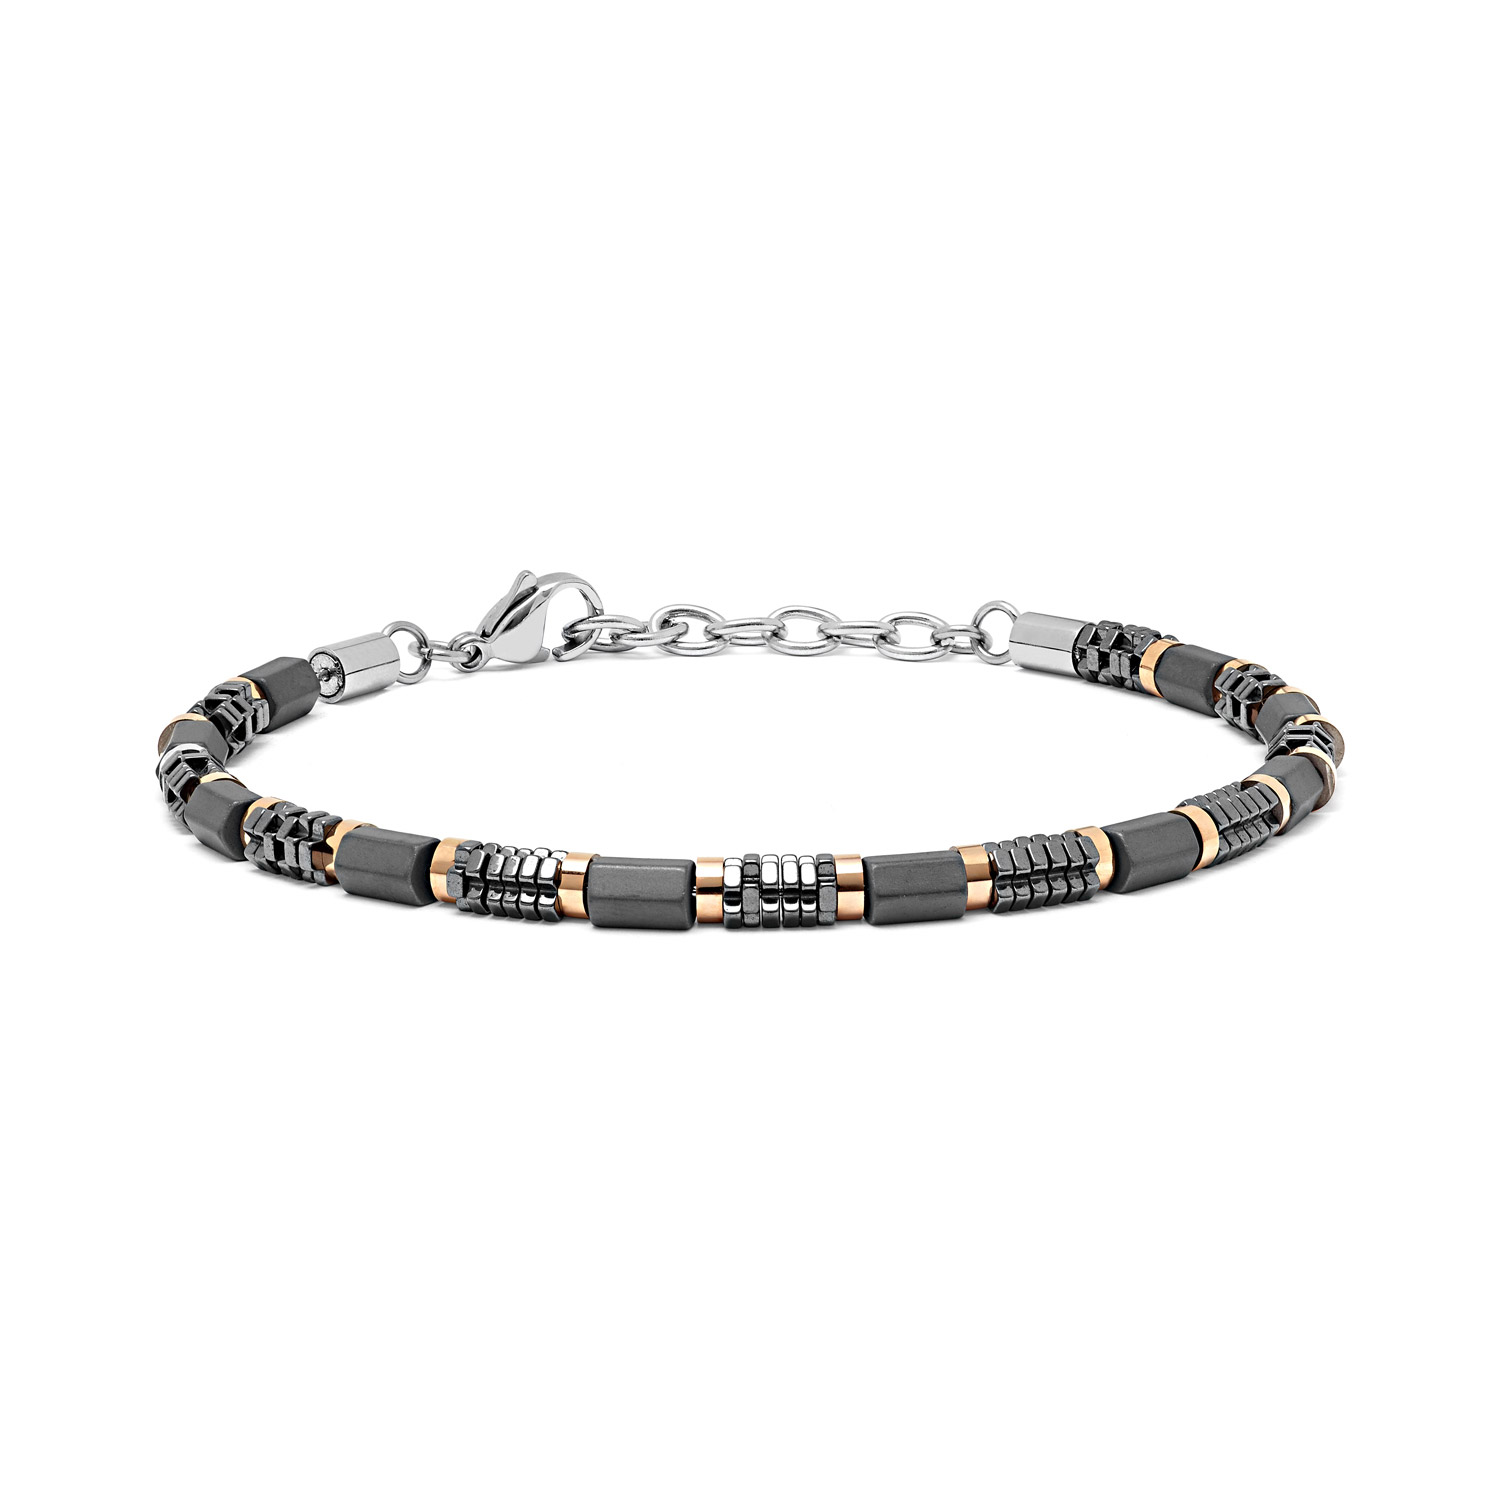 Comets Jewelry Men's Bracelet with Hematite and Steel Sections